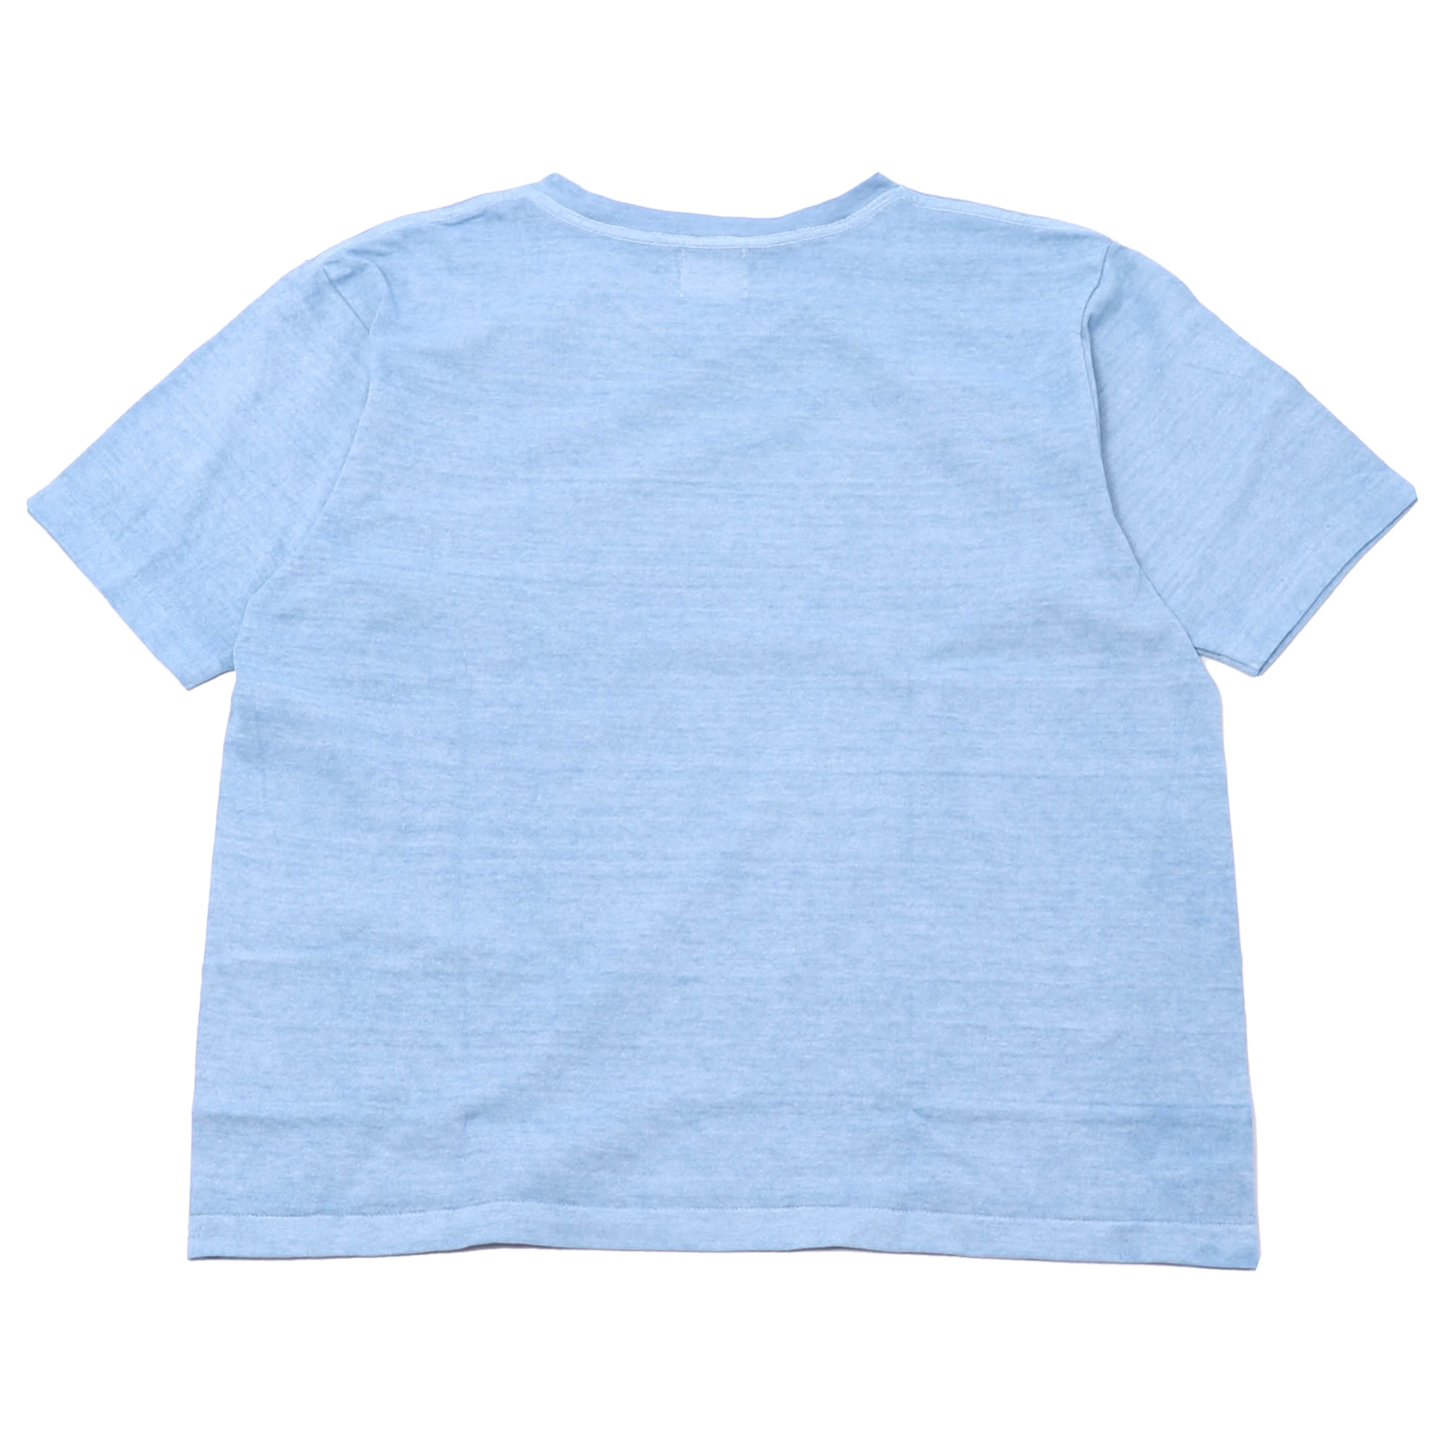 Pigment Dyed V-Neck Tee